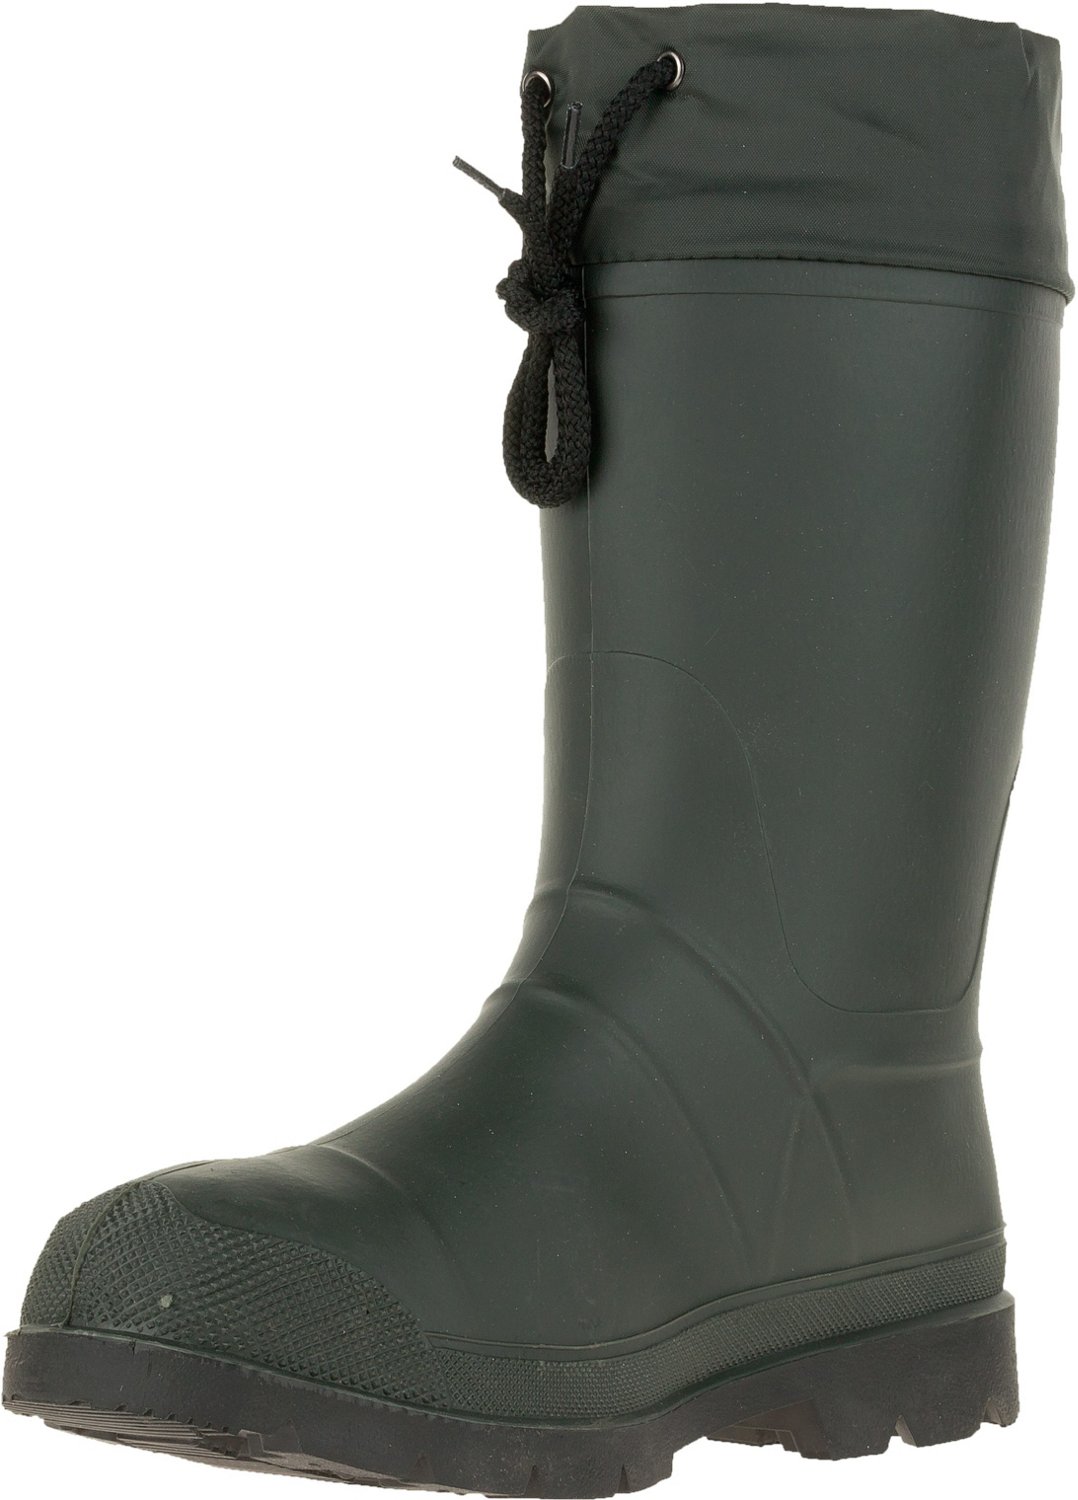 Kamik Men's Forester Rubber Hunting Boots | Academy